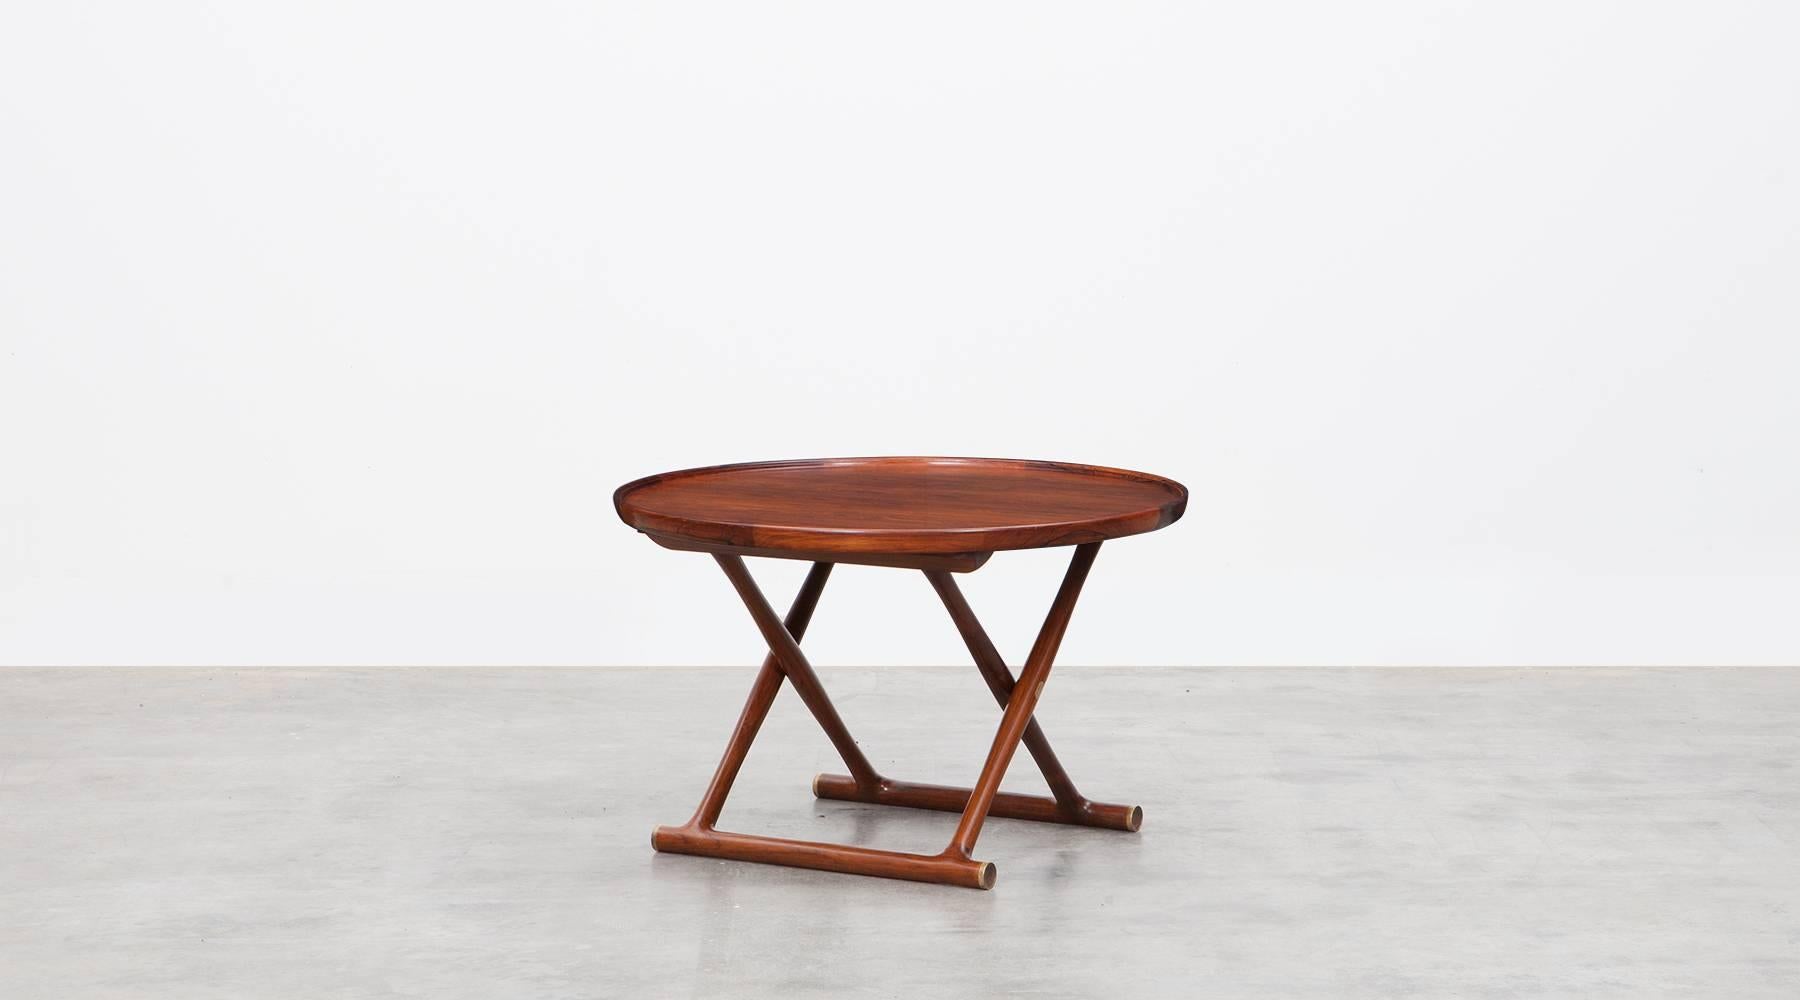 Circular occasional table designed by Mogens Lassen in mahogany with brass details and fittings. Elegantly designed and beautifully made in rosewood. Table folds for storage. Manufactured by A.J. Iversen.

Nanna Ditzel was a Danish jewellery,